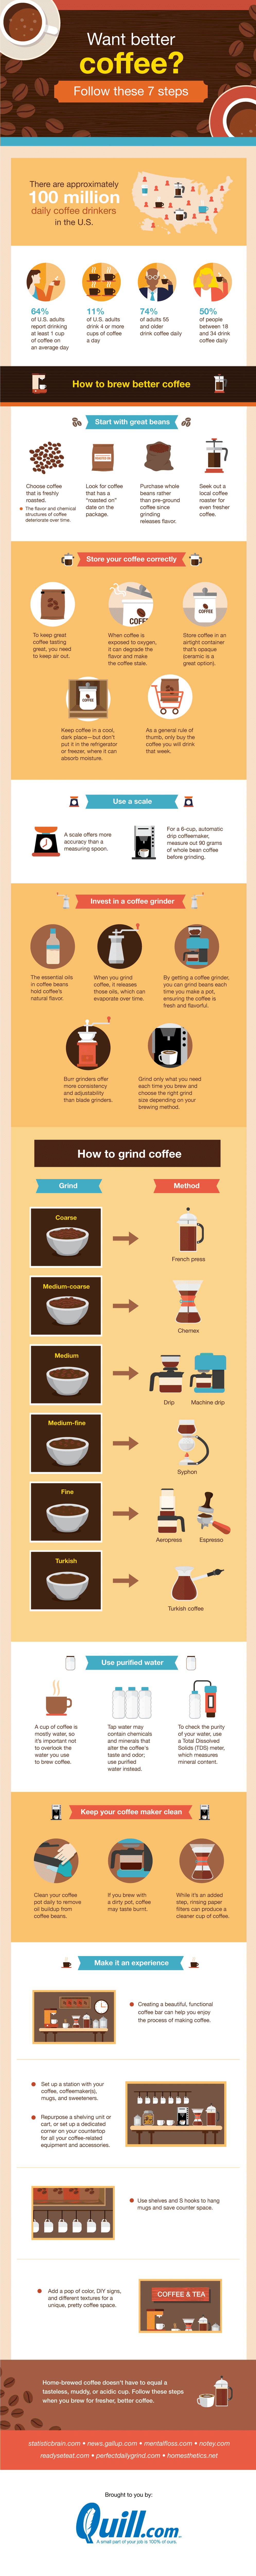 Want better coffee? Follow these 7 steps